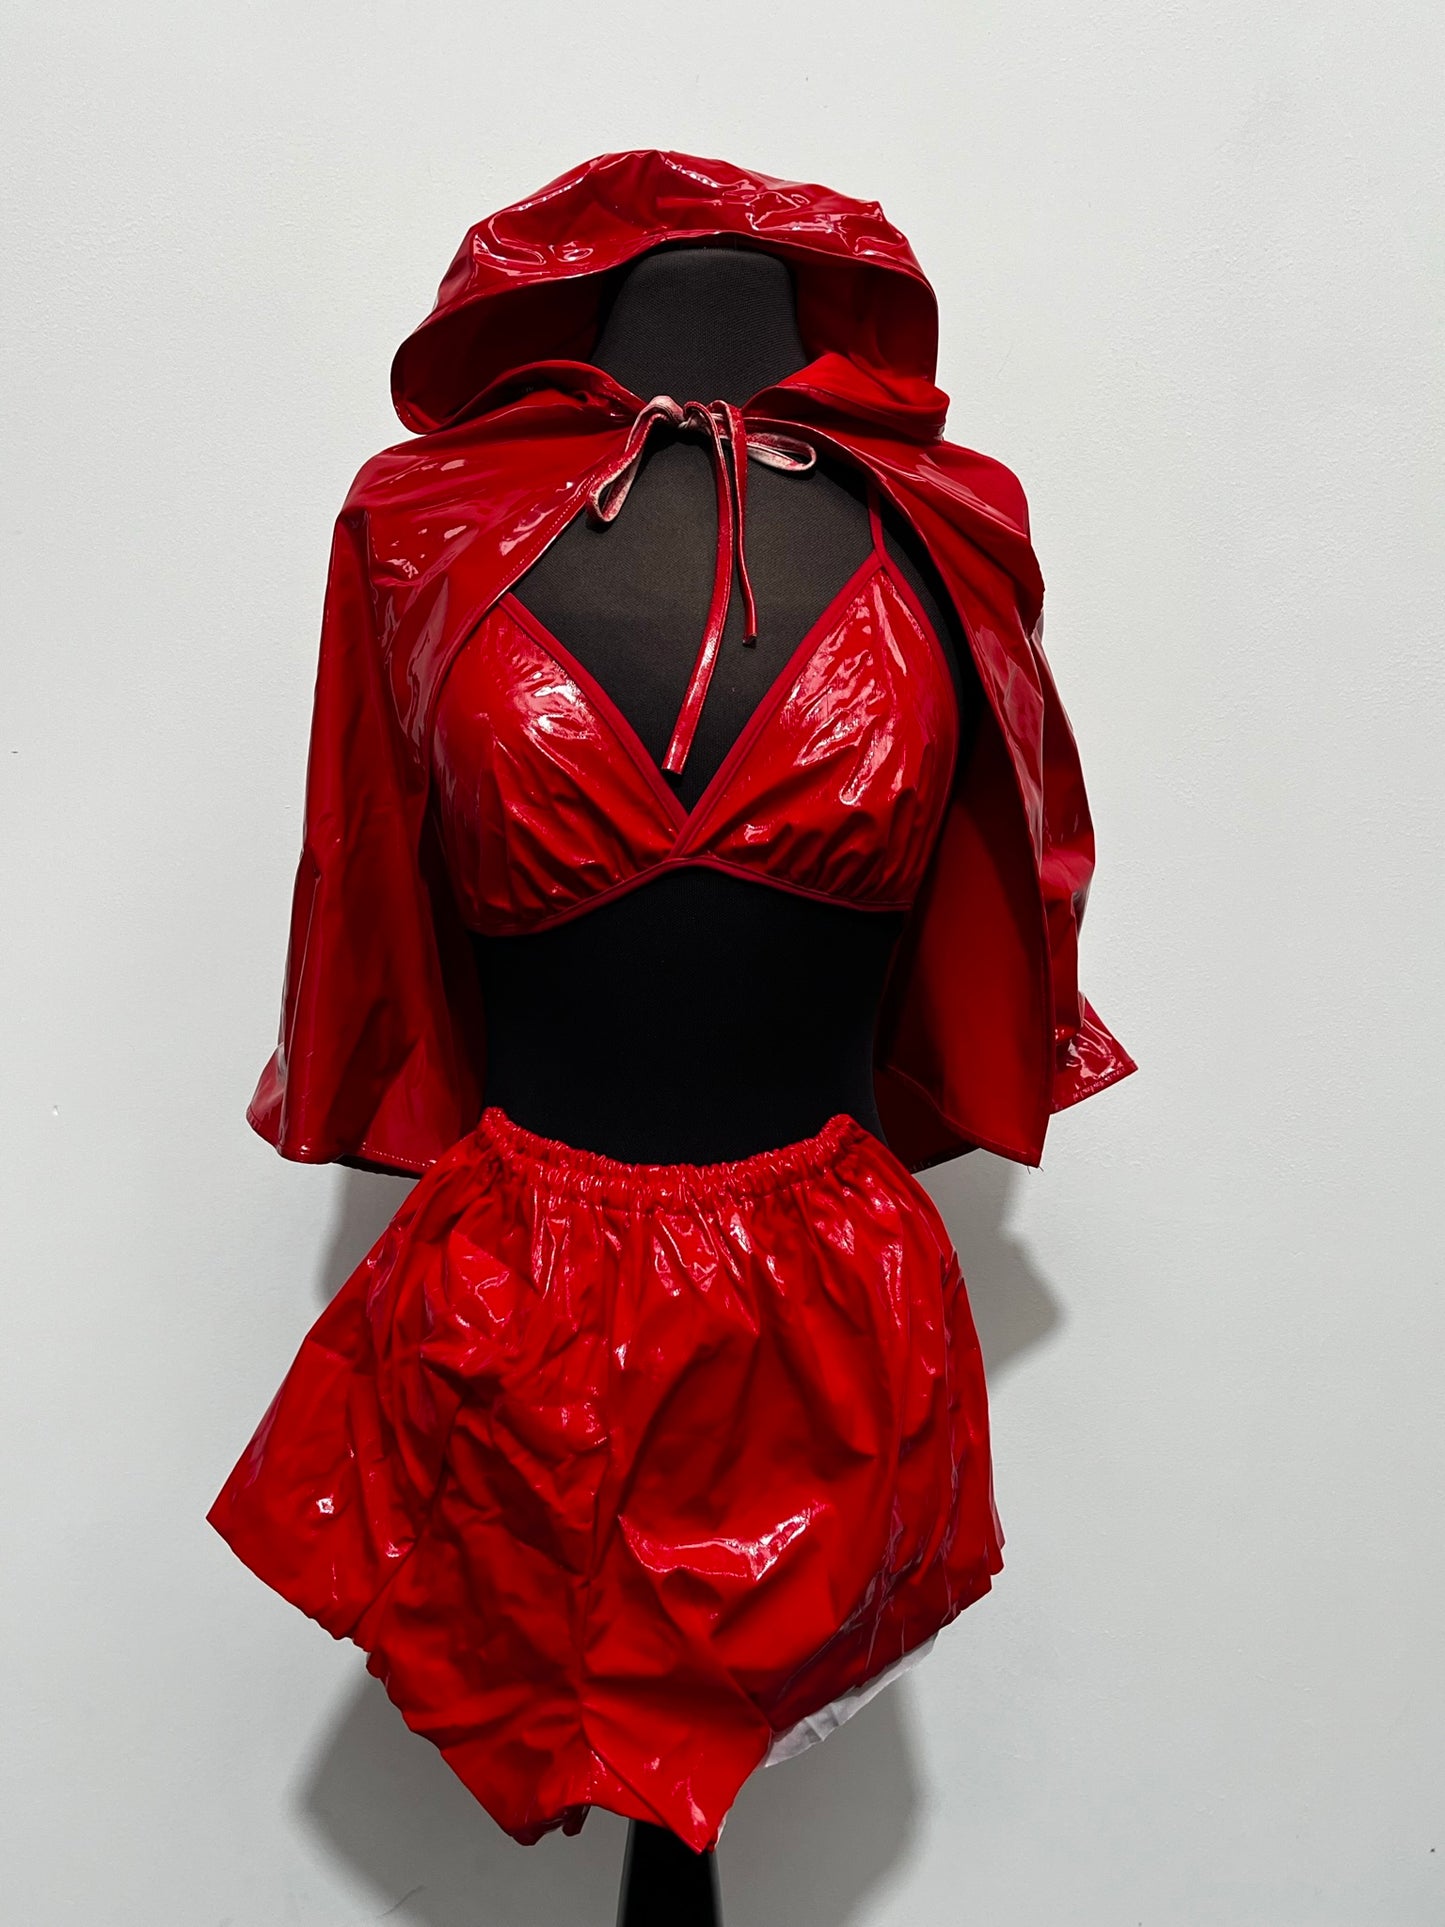 Sexy Red PVC Devil Outfit Size S/M - Ex Hire Fancy Dress Costumes